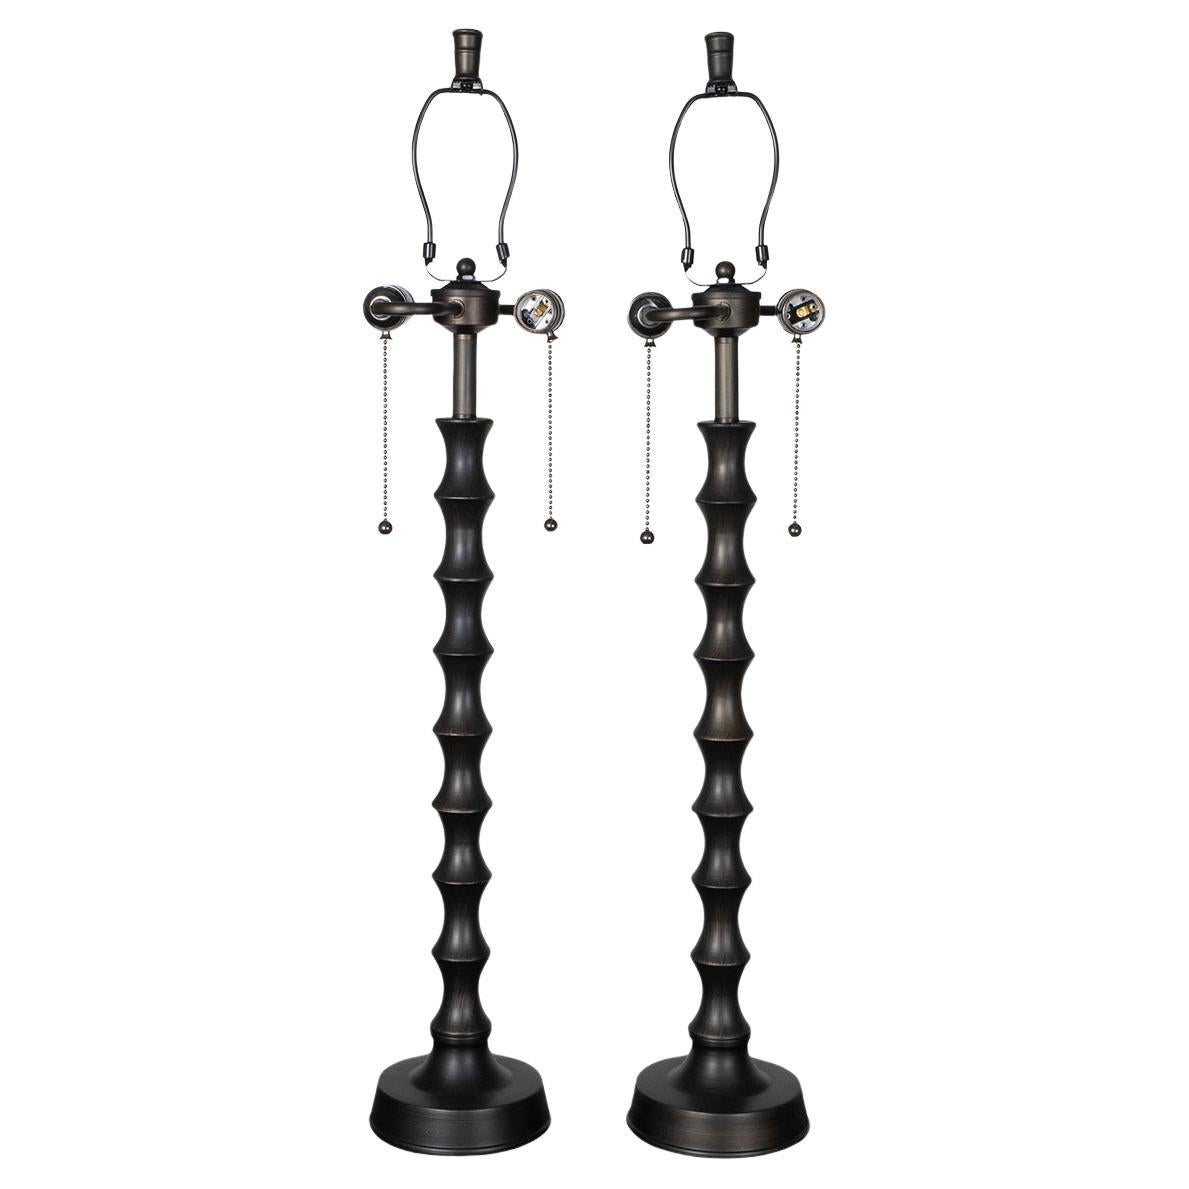 Pair of bronze finish faux bamboo table lamps